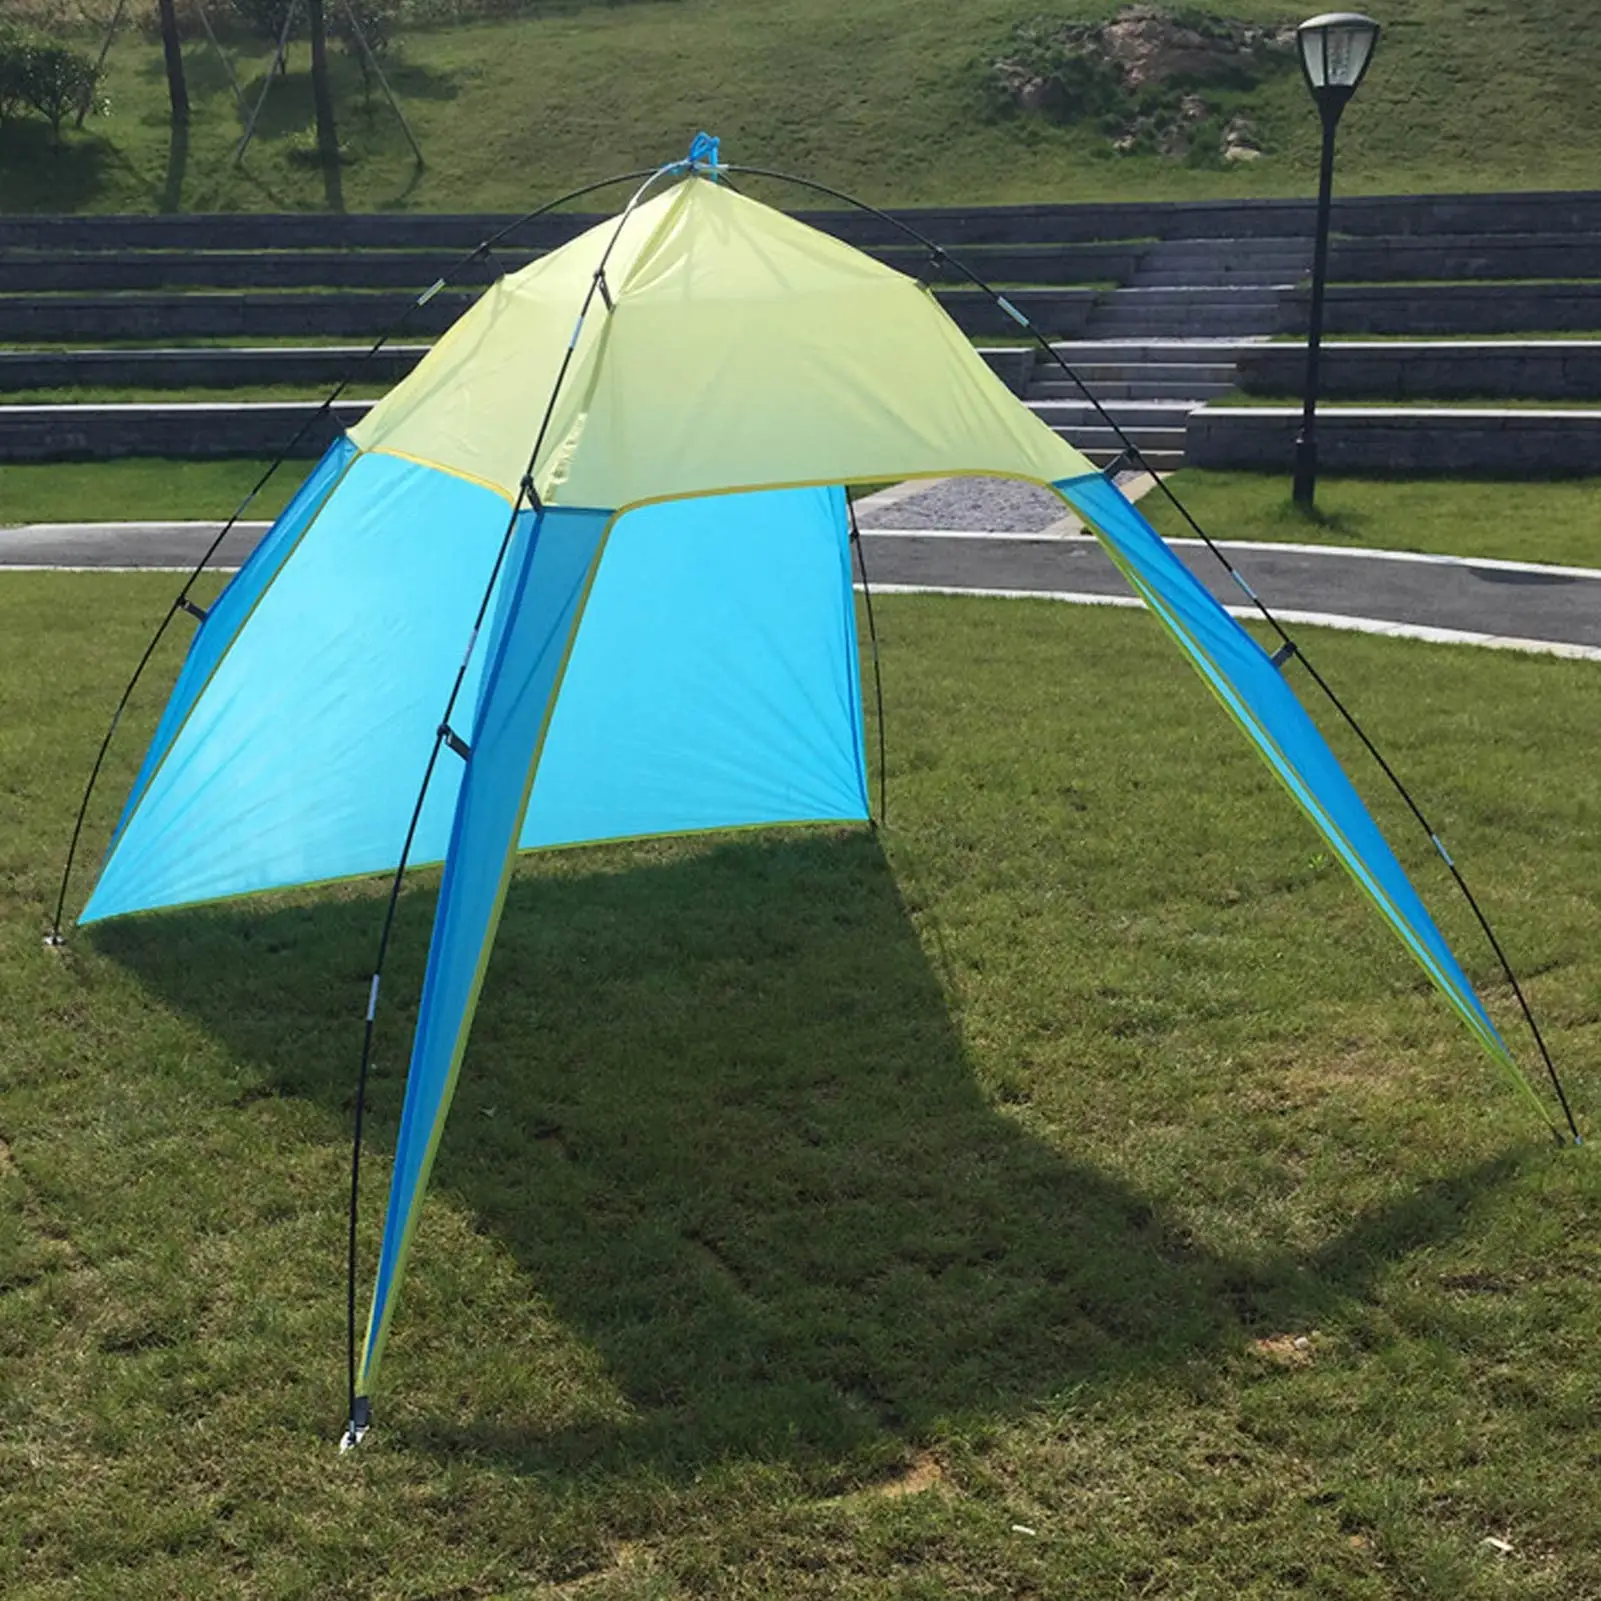 Outdoor 170T Superior Waterproof And Anti-UV Canopy Beach Shelter Shade Tent For Fishing Camping Trip Beach Picnic Activities